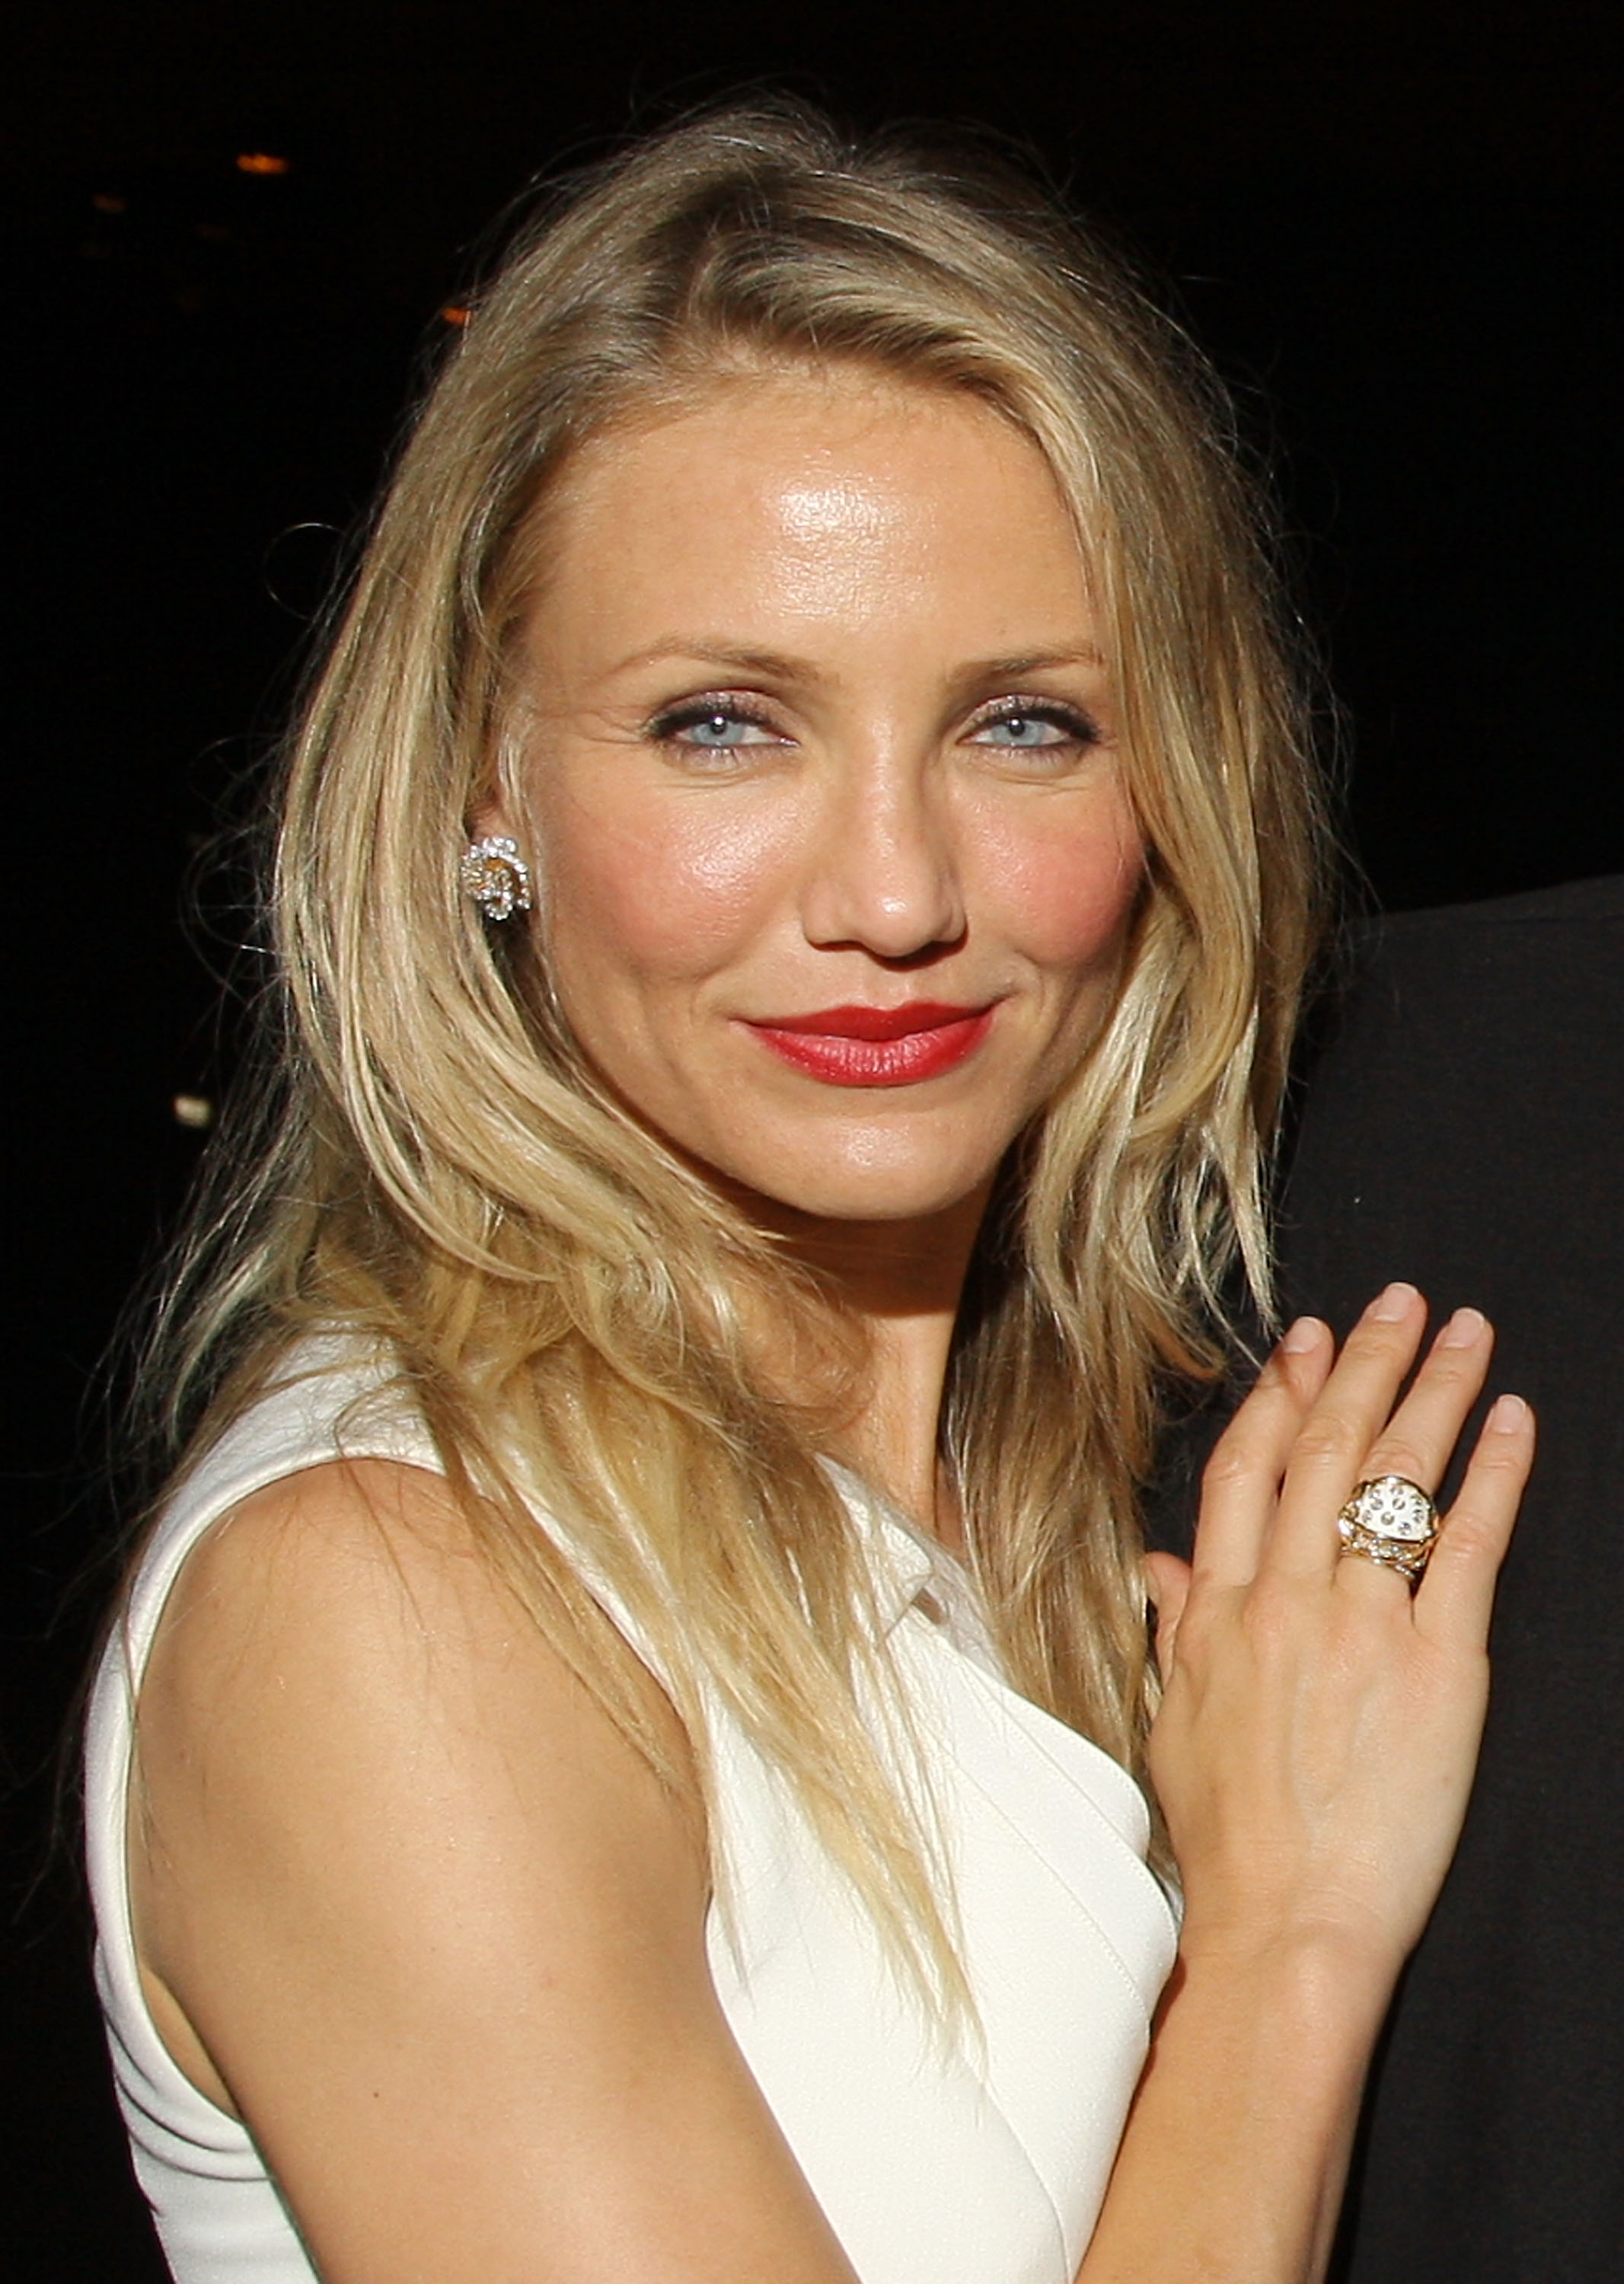 Cameron Diaz attends the after party for the New York premiere of "My Sister's Keeper" at Loeb Central Park Boathouse on June 24, 2009, in New York City | Source: Getty Images